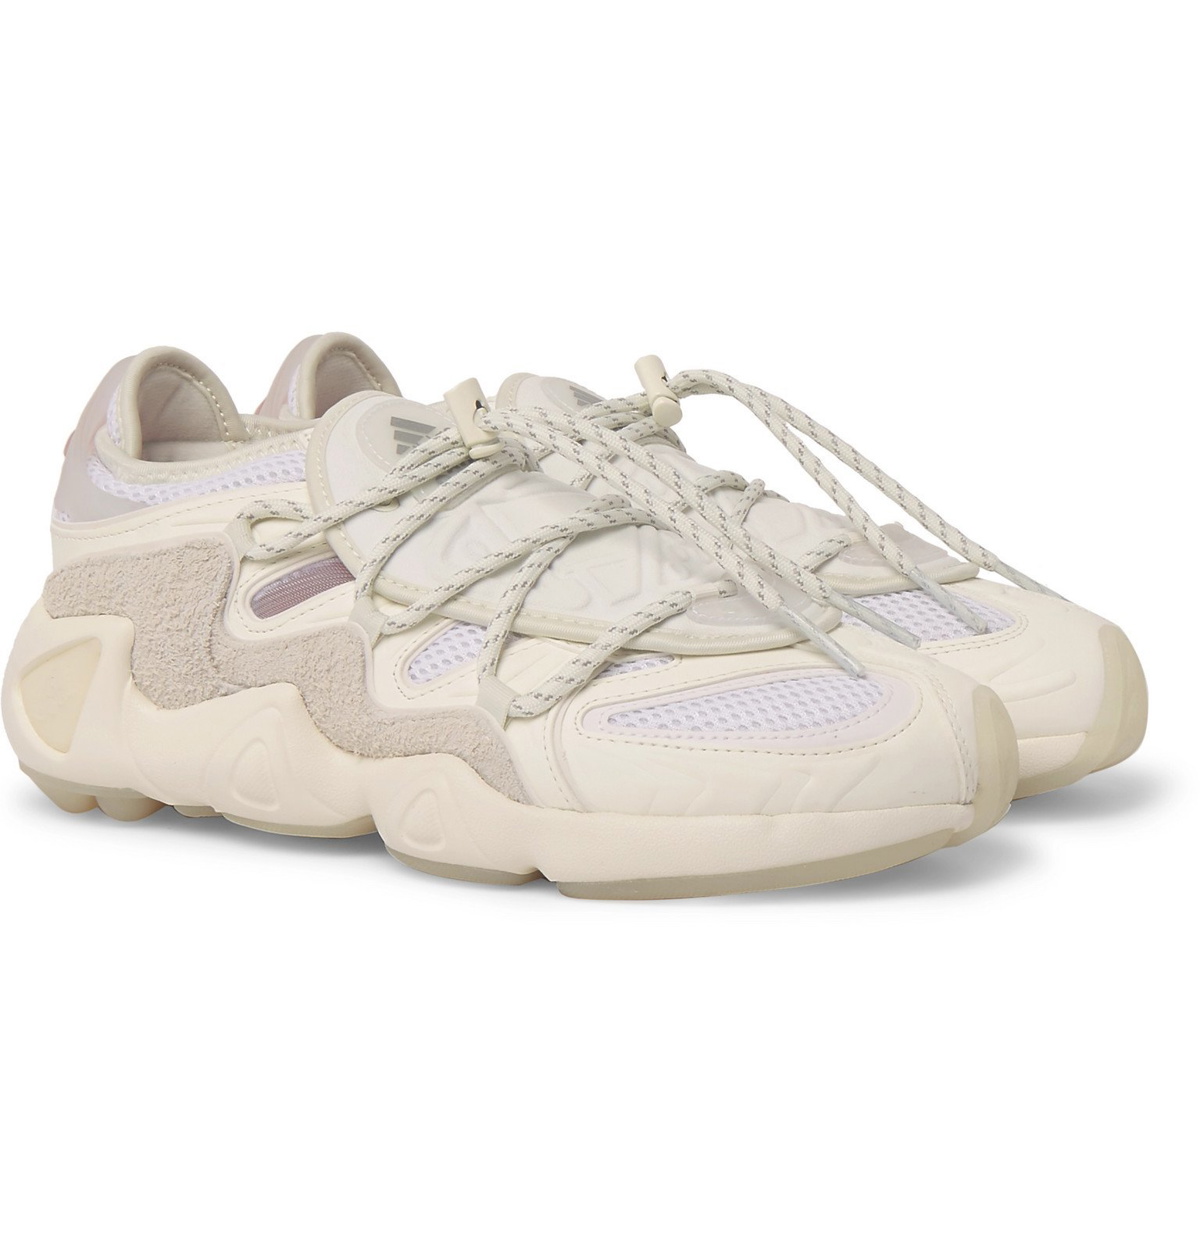 adidas - Suede, Leather and Mesh Sneakers - White adidas Consortium